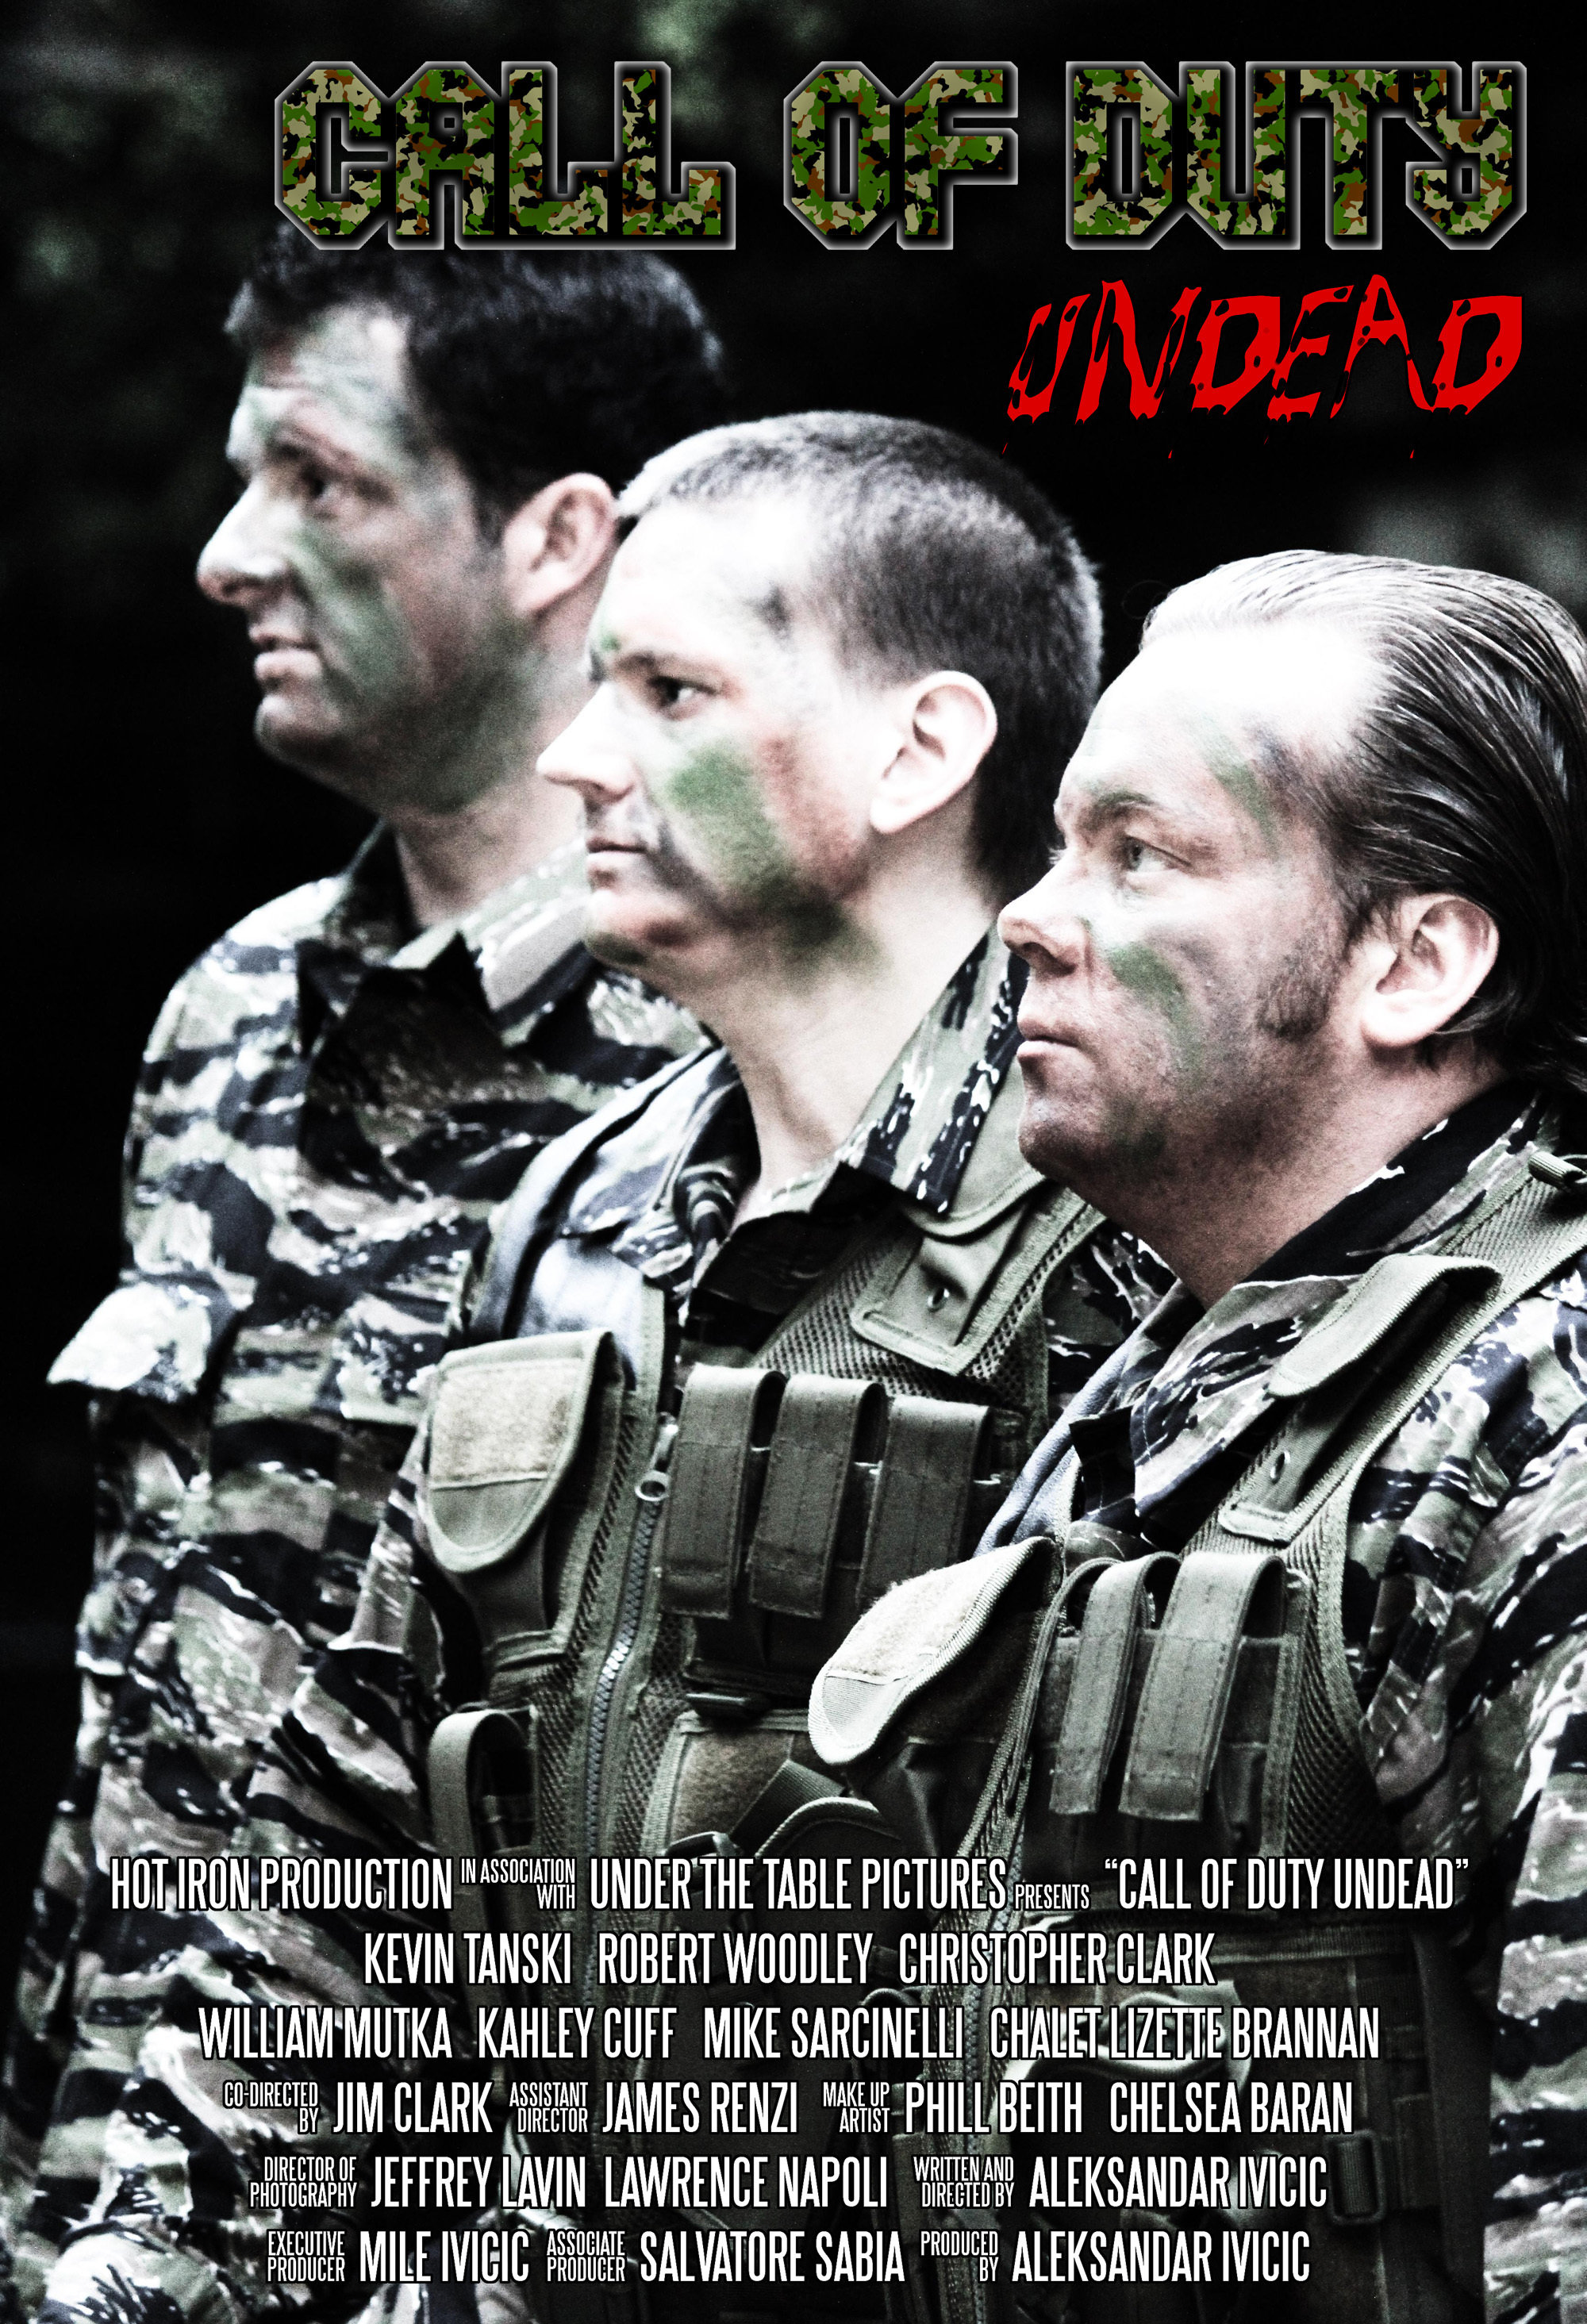 Charity Based Indie Film, Call of Duty Undead to benefit Wounded Warrior Project!